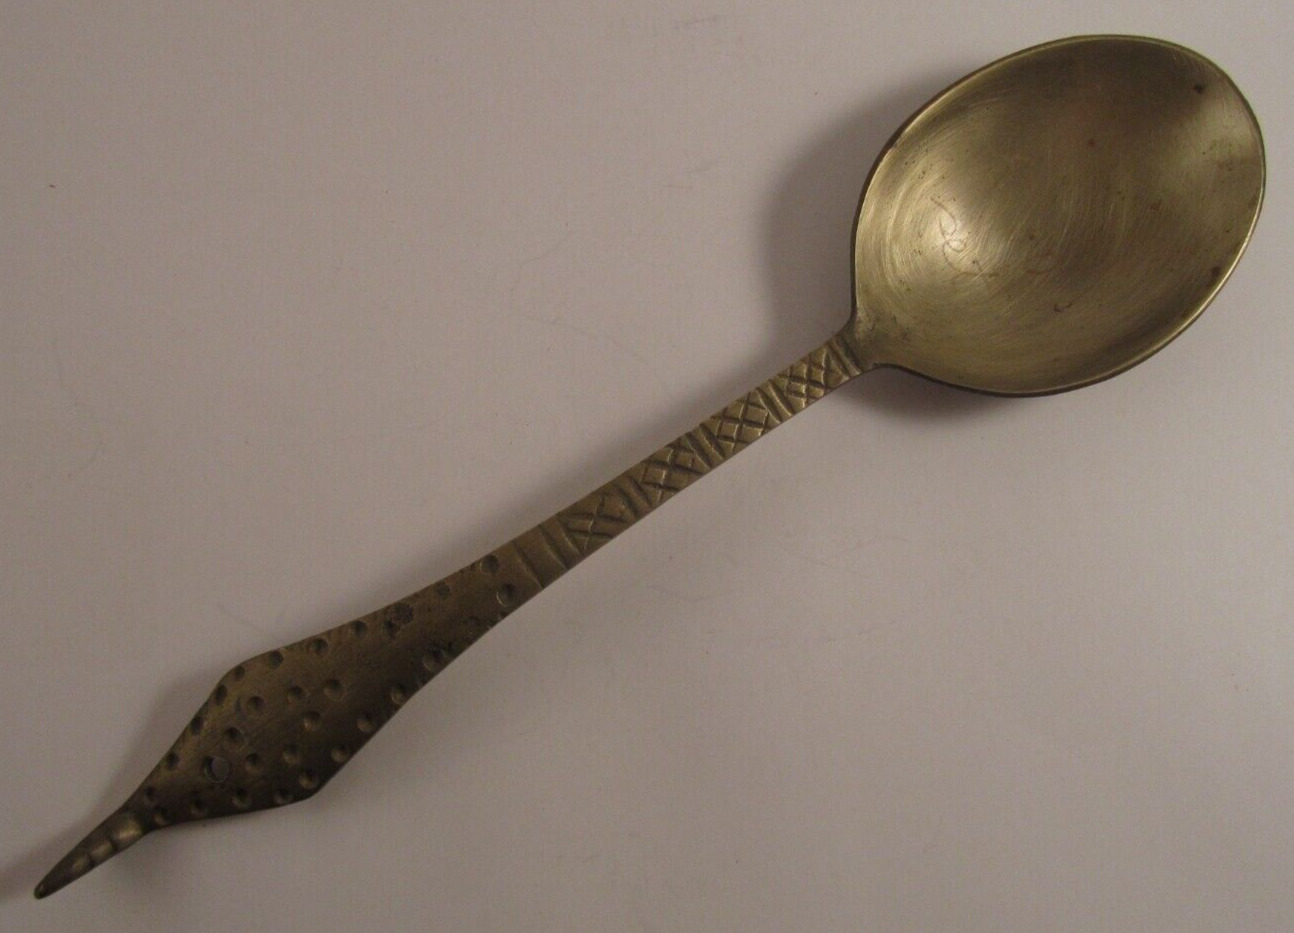 Vintage Large Ornate Rustic Brass Spoon Utensil 12 Inches